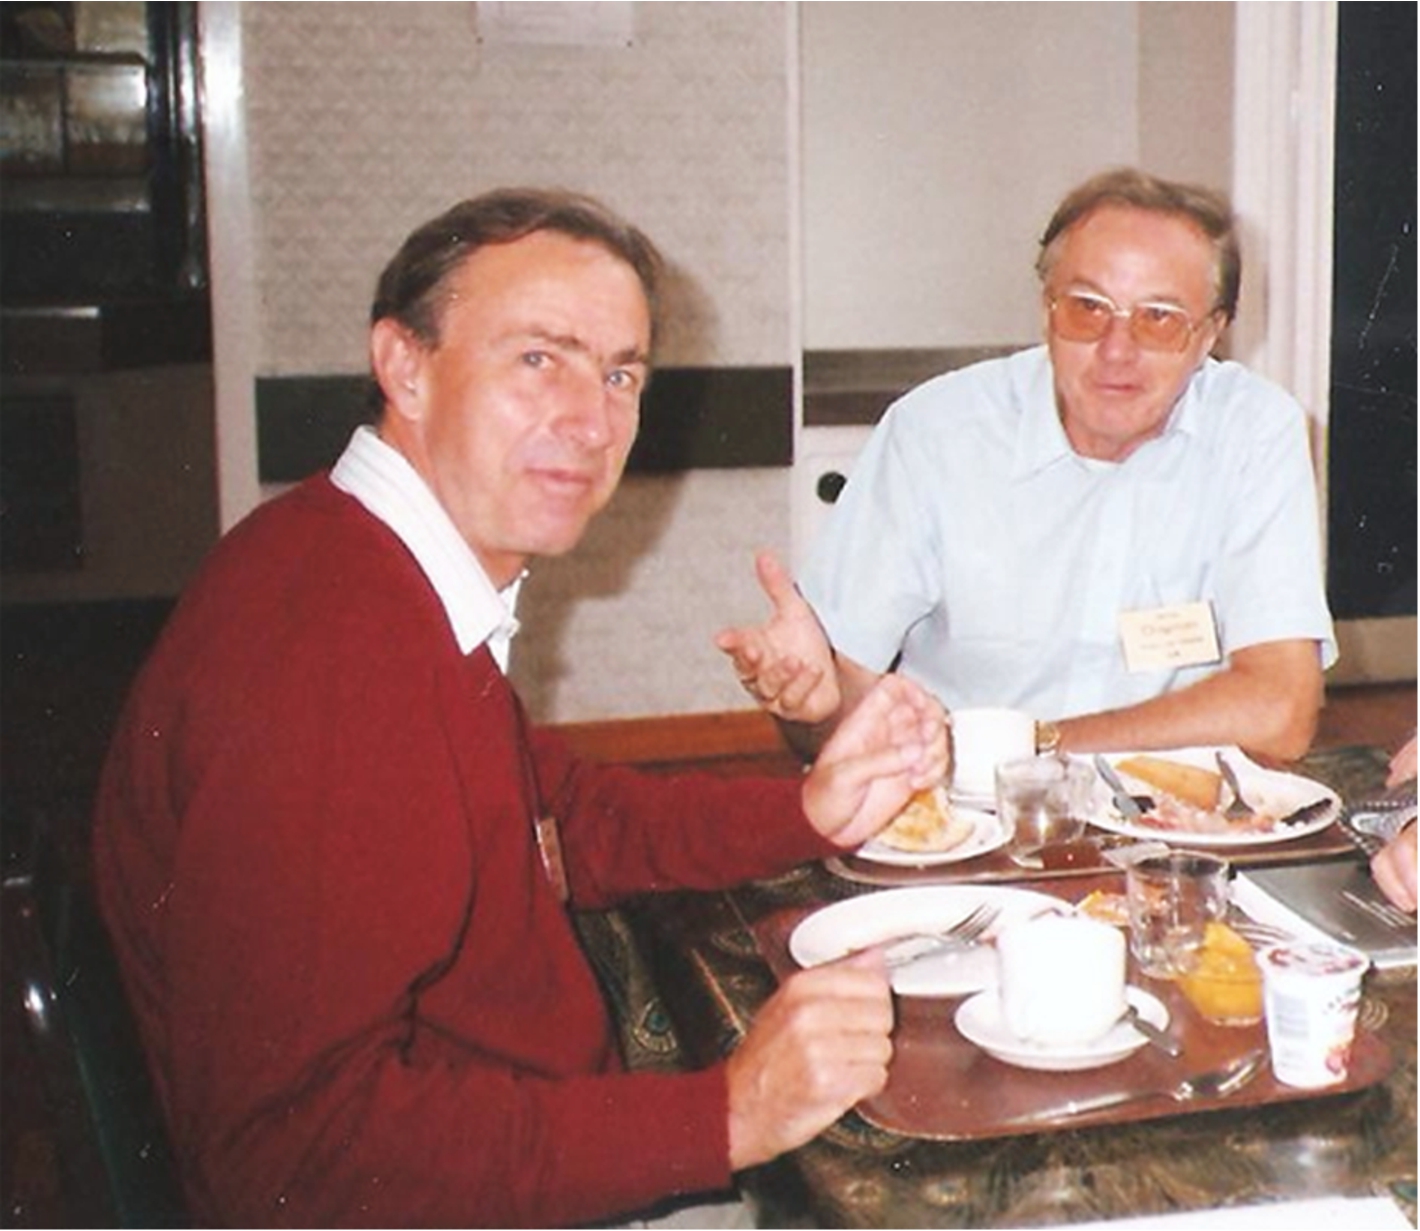 Henry Mantsch (on the left) with Dennis Chapman at the 1987 ECSBM Conference in Freiburg, Germany (photograph kindly provided by Henry Mantsch).